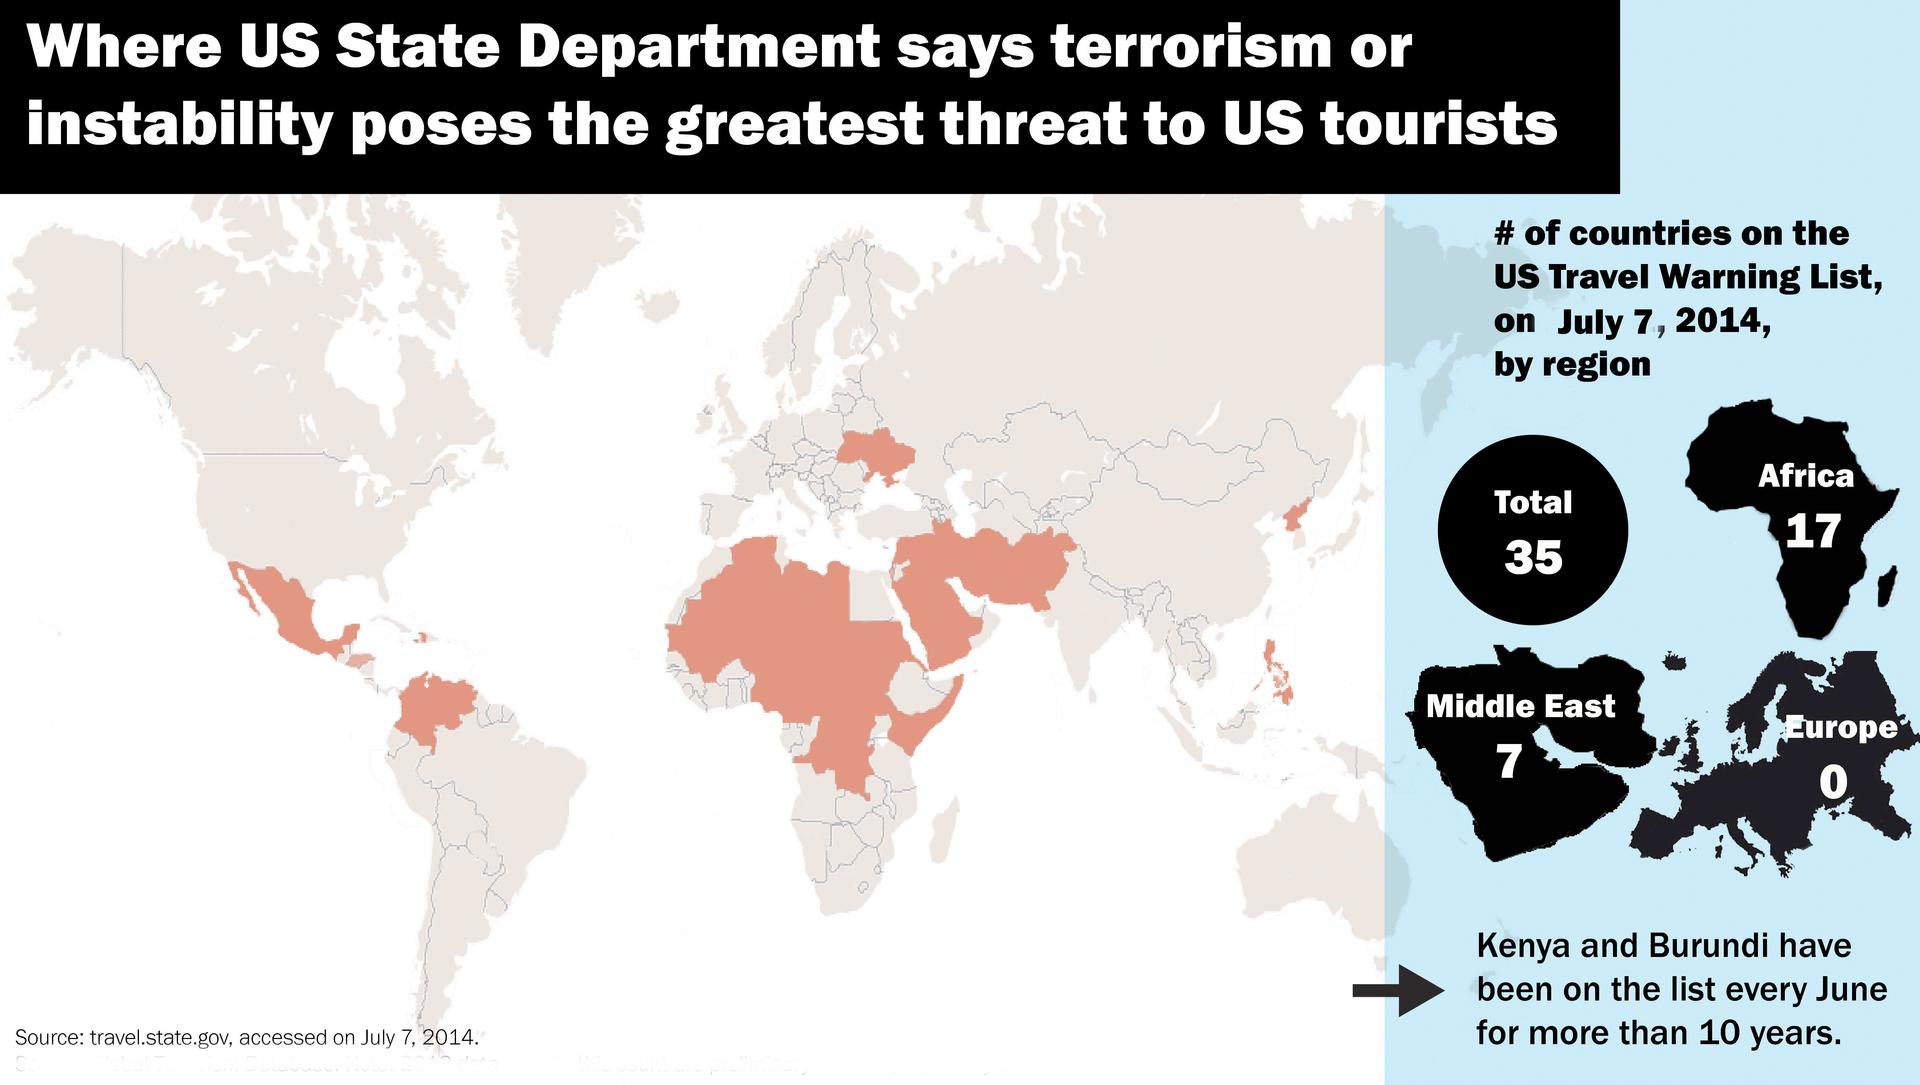 Where US State Department says terrorism or instability poses the greatest threat to US citizens